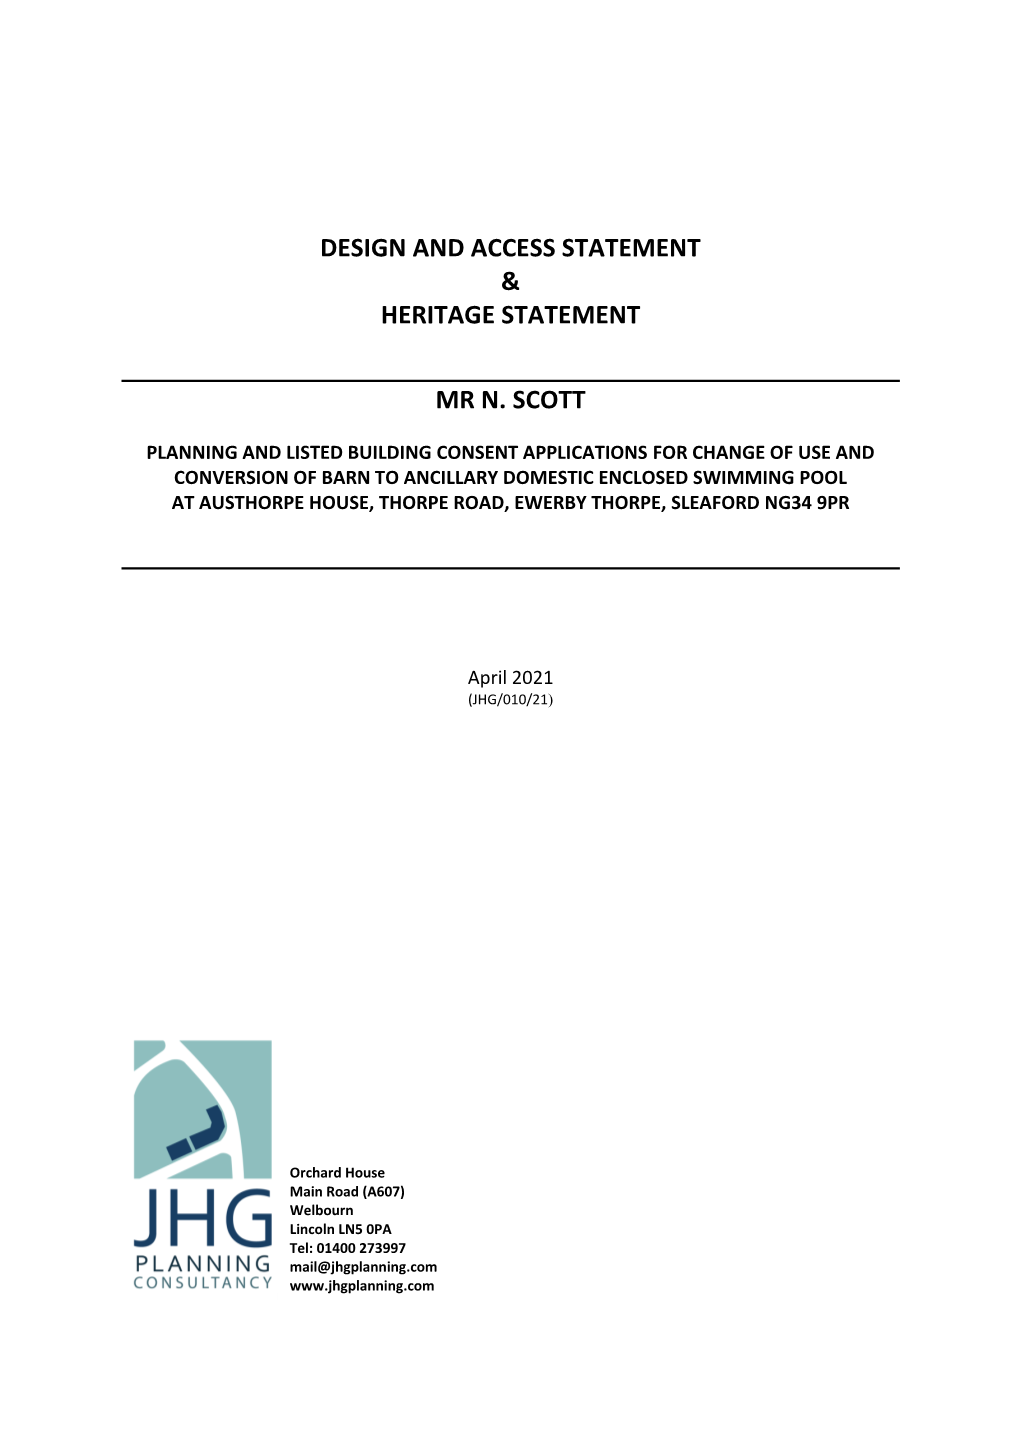 Design and Access Statement & Heritage Statement